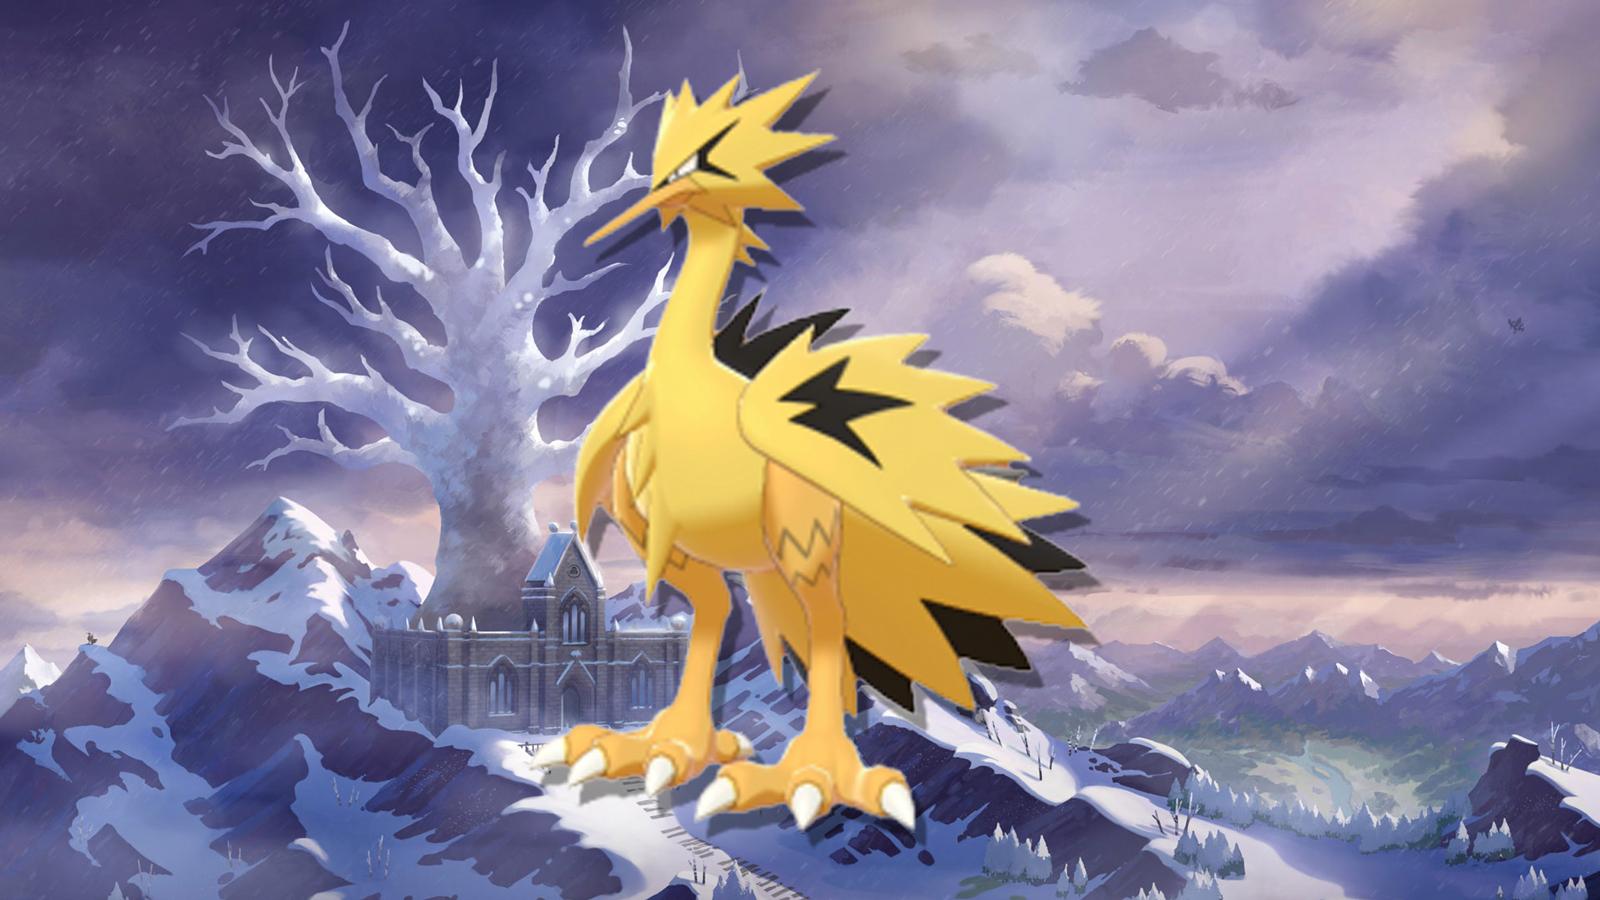 Shiny Galarian Zapdos appearing in Pokemon Sword and Shield